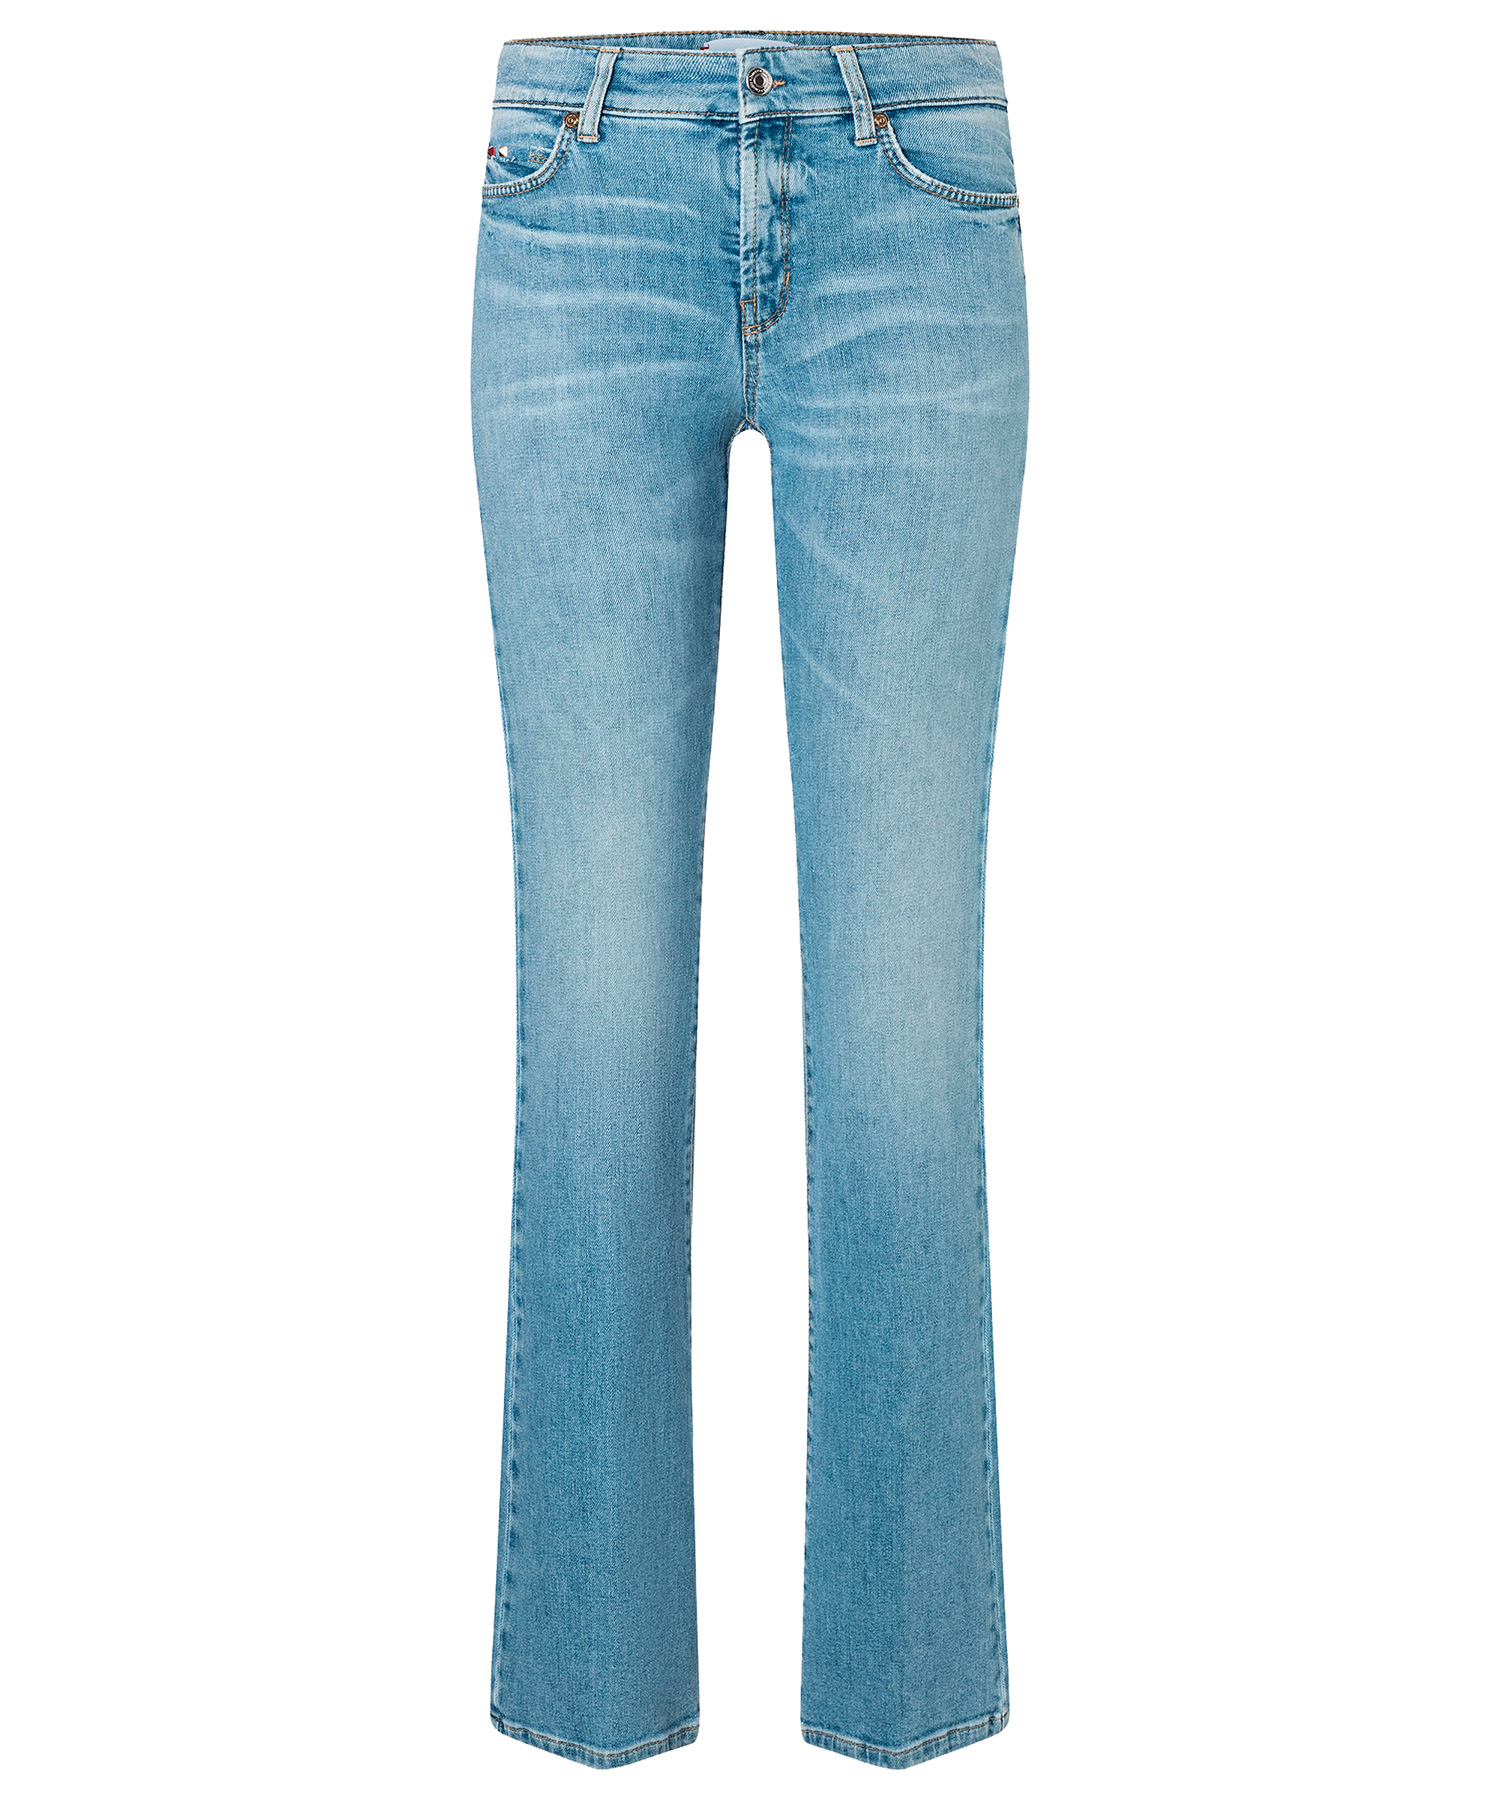 Perfect Dalset Plons Cambio flared jeans Paris | BeOne